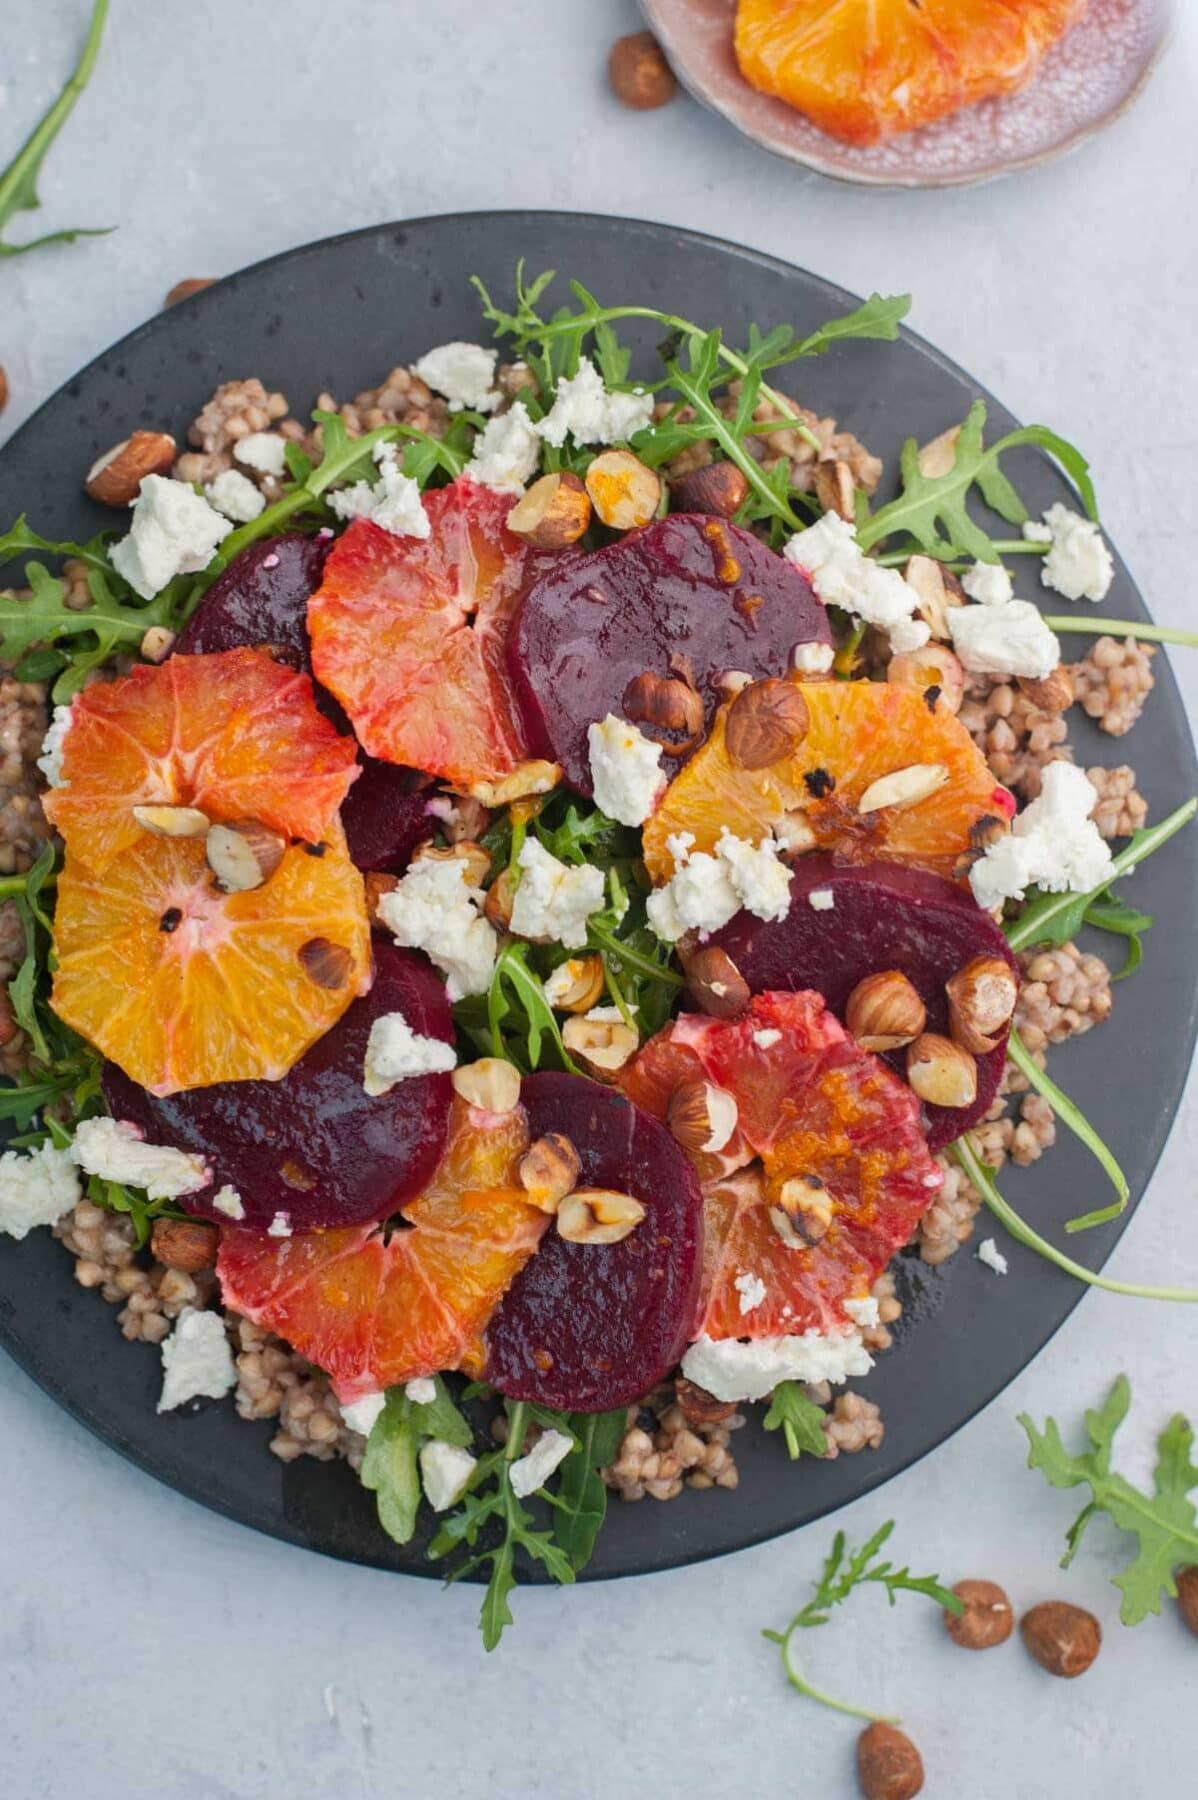 Buckwheat salad with beets, oranges, arugula, and feta cheese on a black plate.